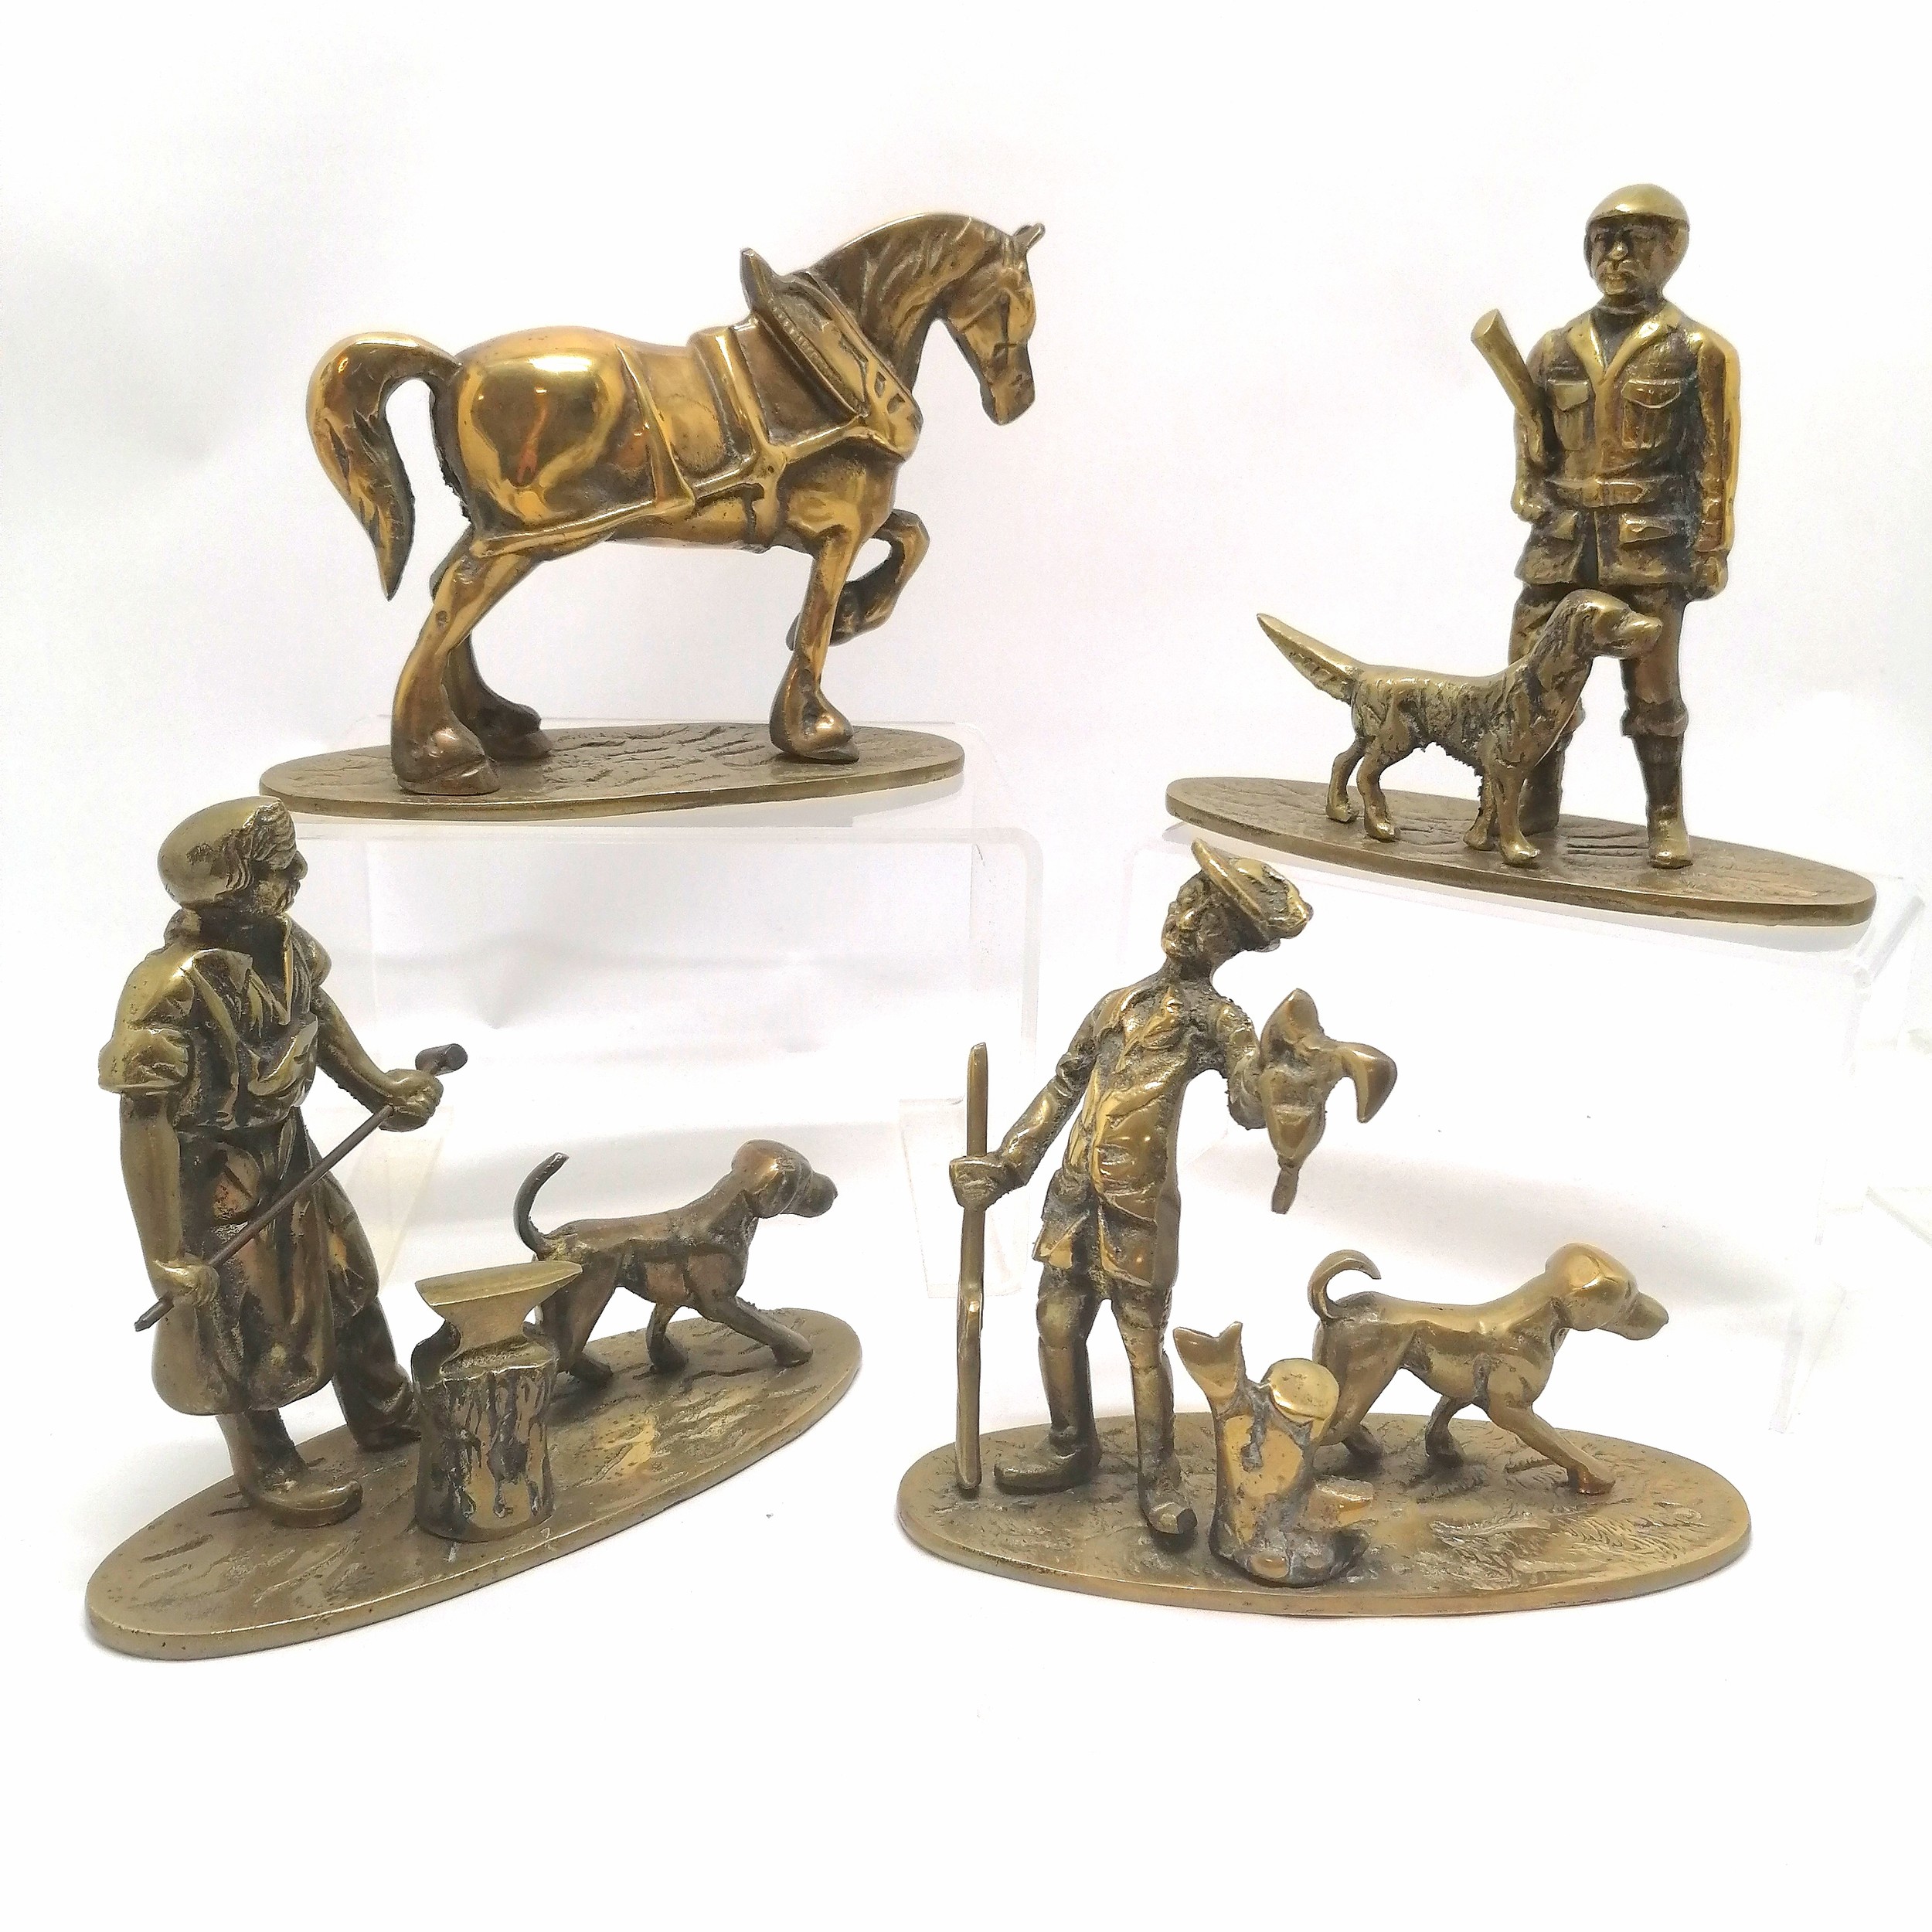 Brass shire horse, hunter with dog, blacksmith and gentleman with a dog all on oval brass bases